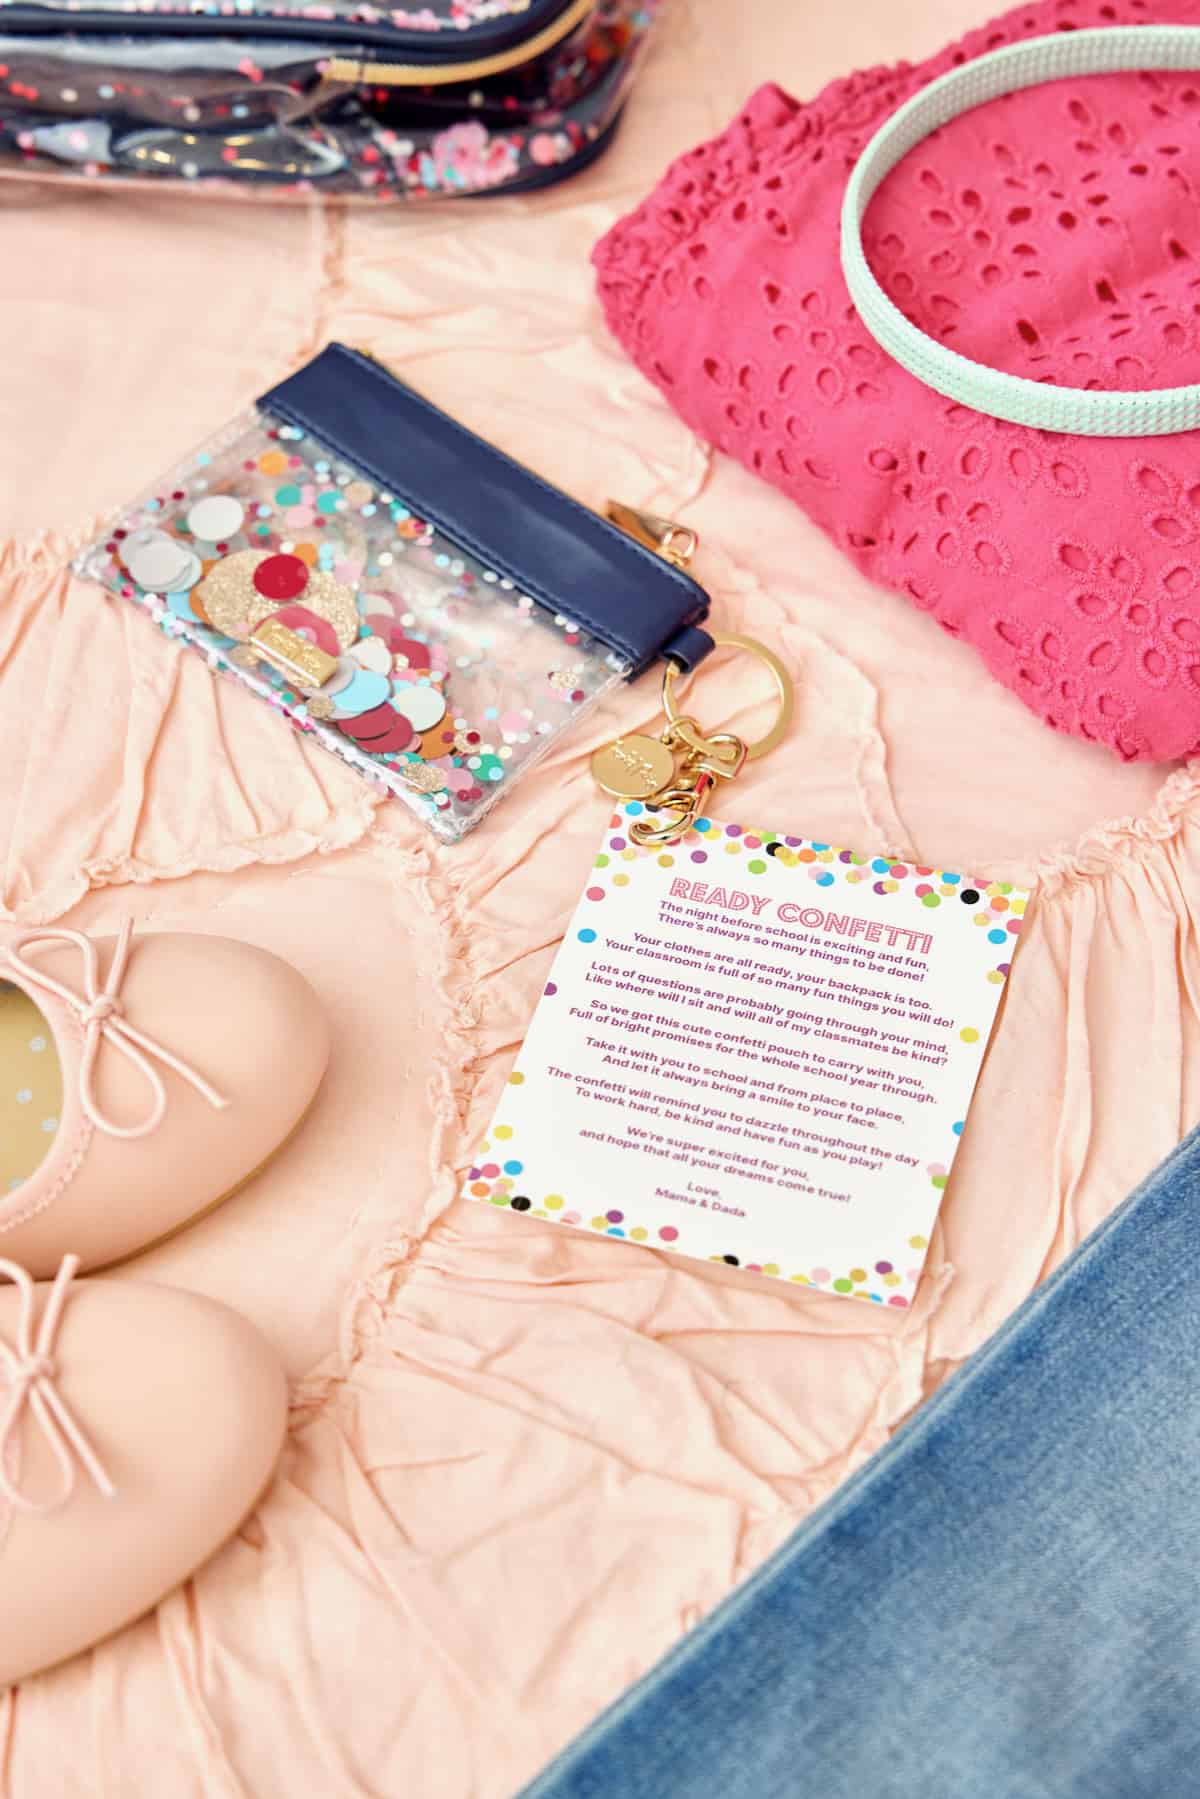 A small key chain pouch with glitter, a pair of child's pink ballet flats, and a bright pink eyelet lace child's shirt on a pale pink ruffled bedspread.